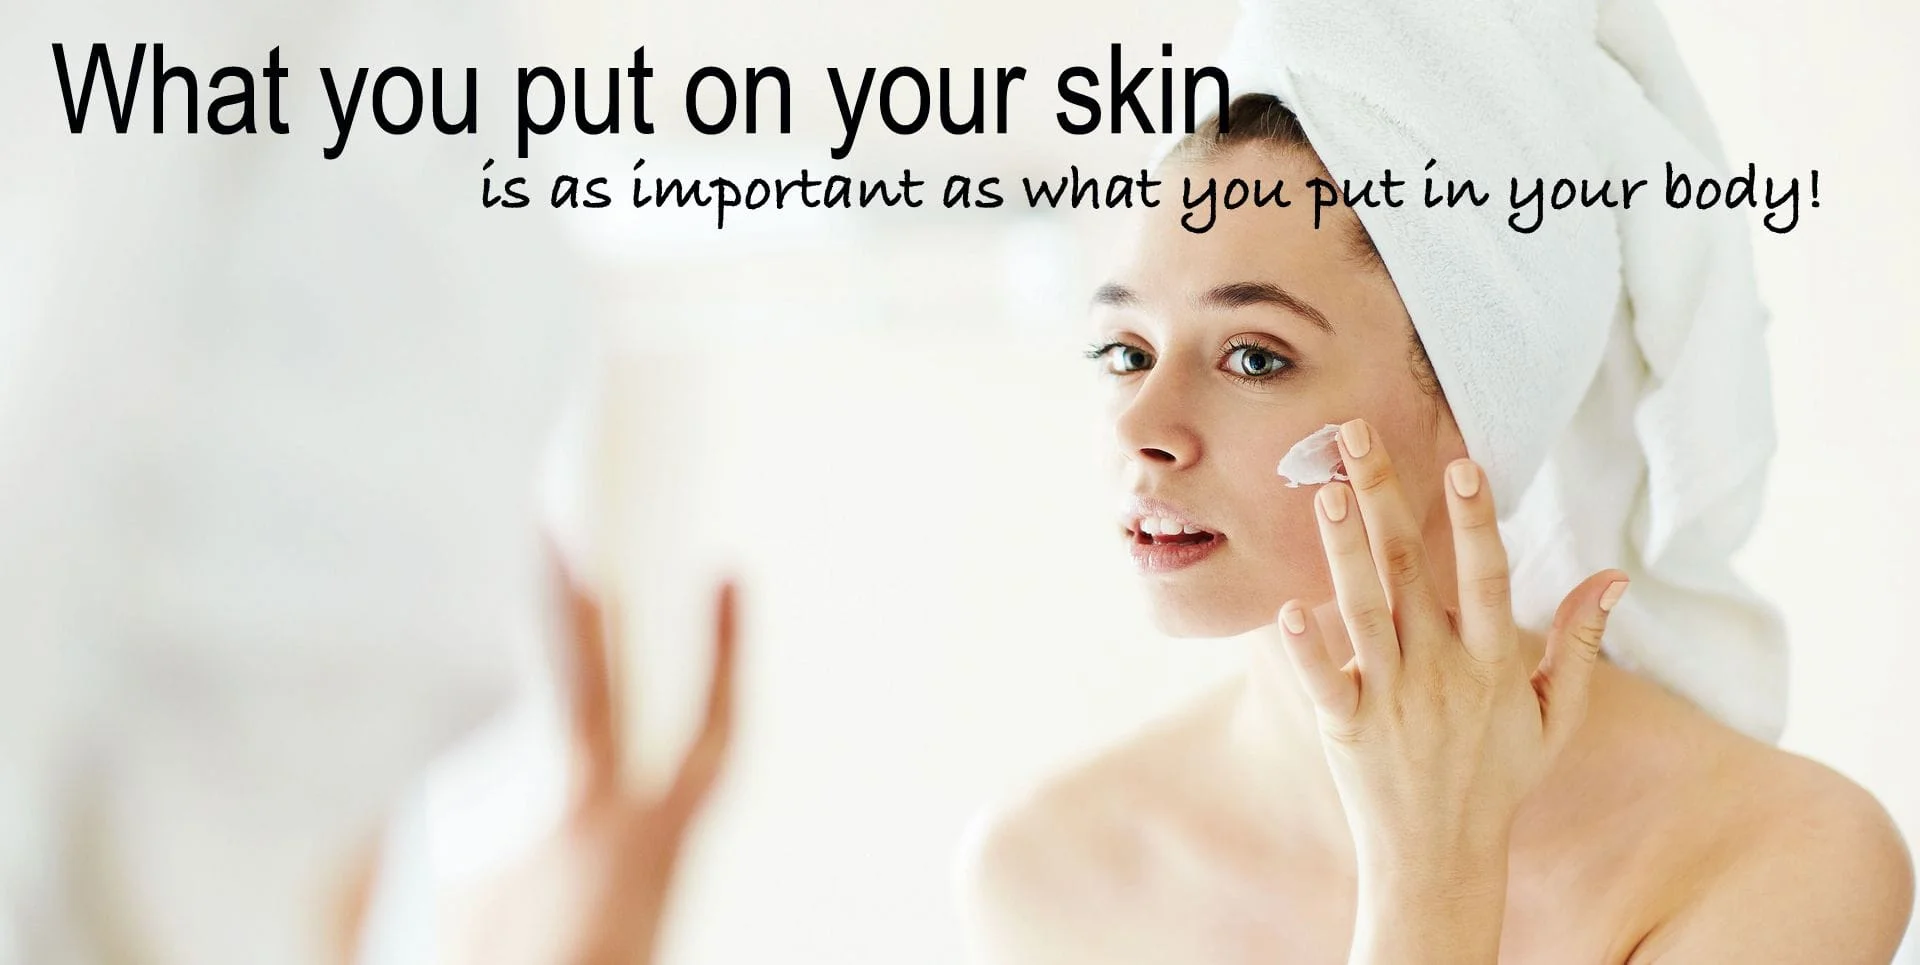 What you put on your skin